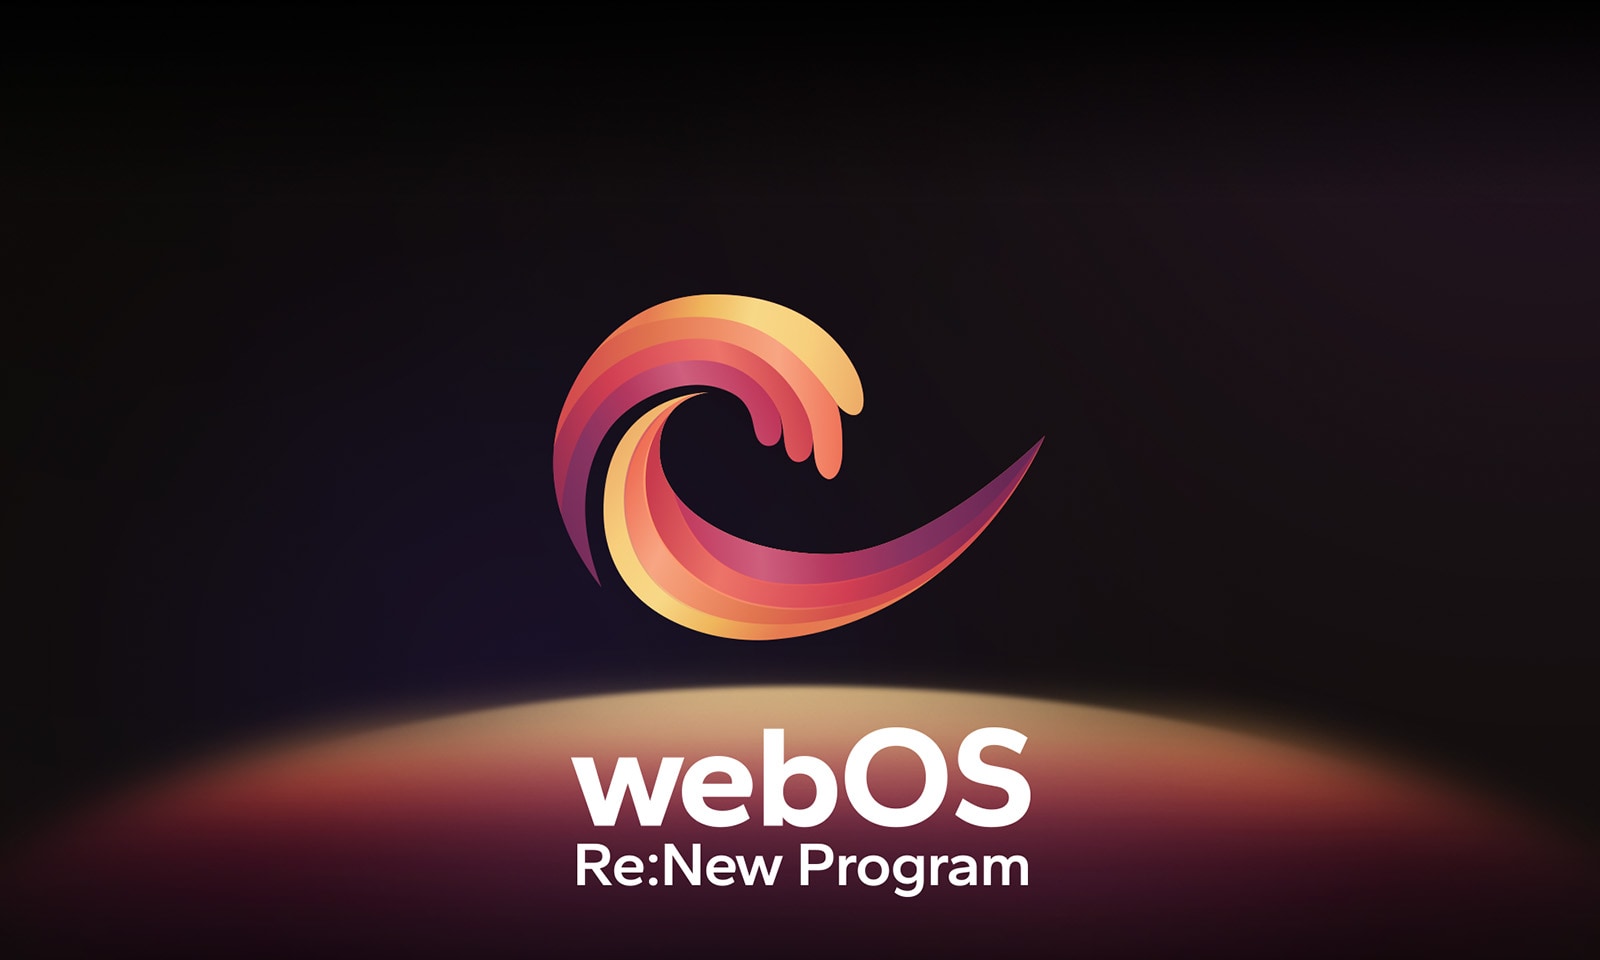 The webOS logo hovering in the center on a black background, and the space below is illuminated with the logo colors of red, orange, and yellow. The words "webOS Re:New Program" are below the logo.